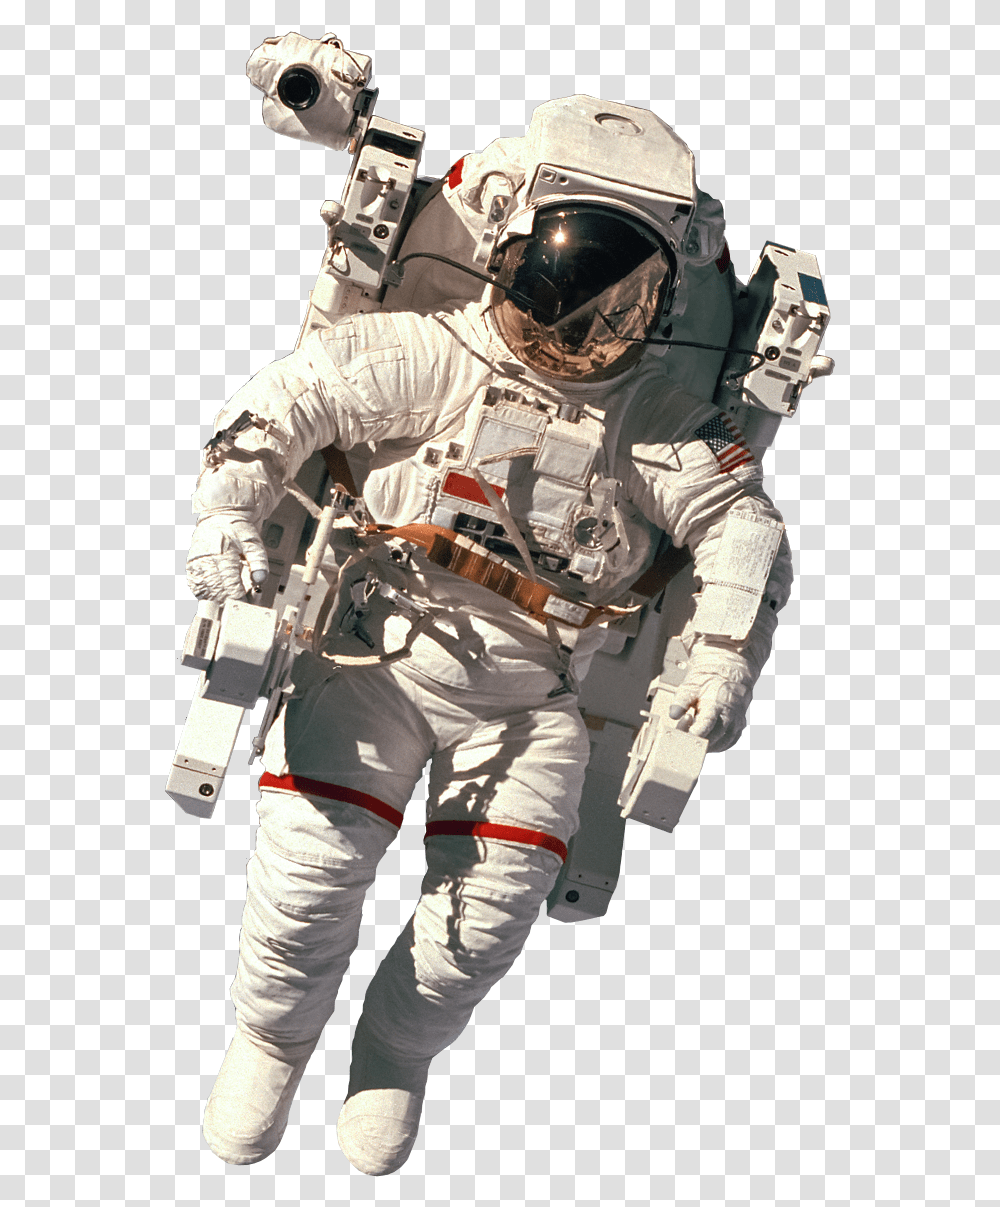 Download Spaceman Astronaut Image With No Background Astronaut Background, Helmet, Clothing, Apparel, Person Transparent Png